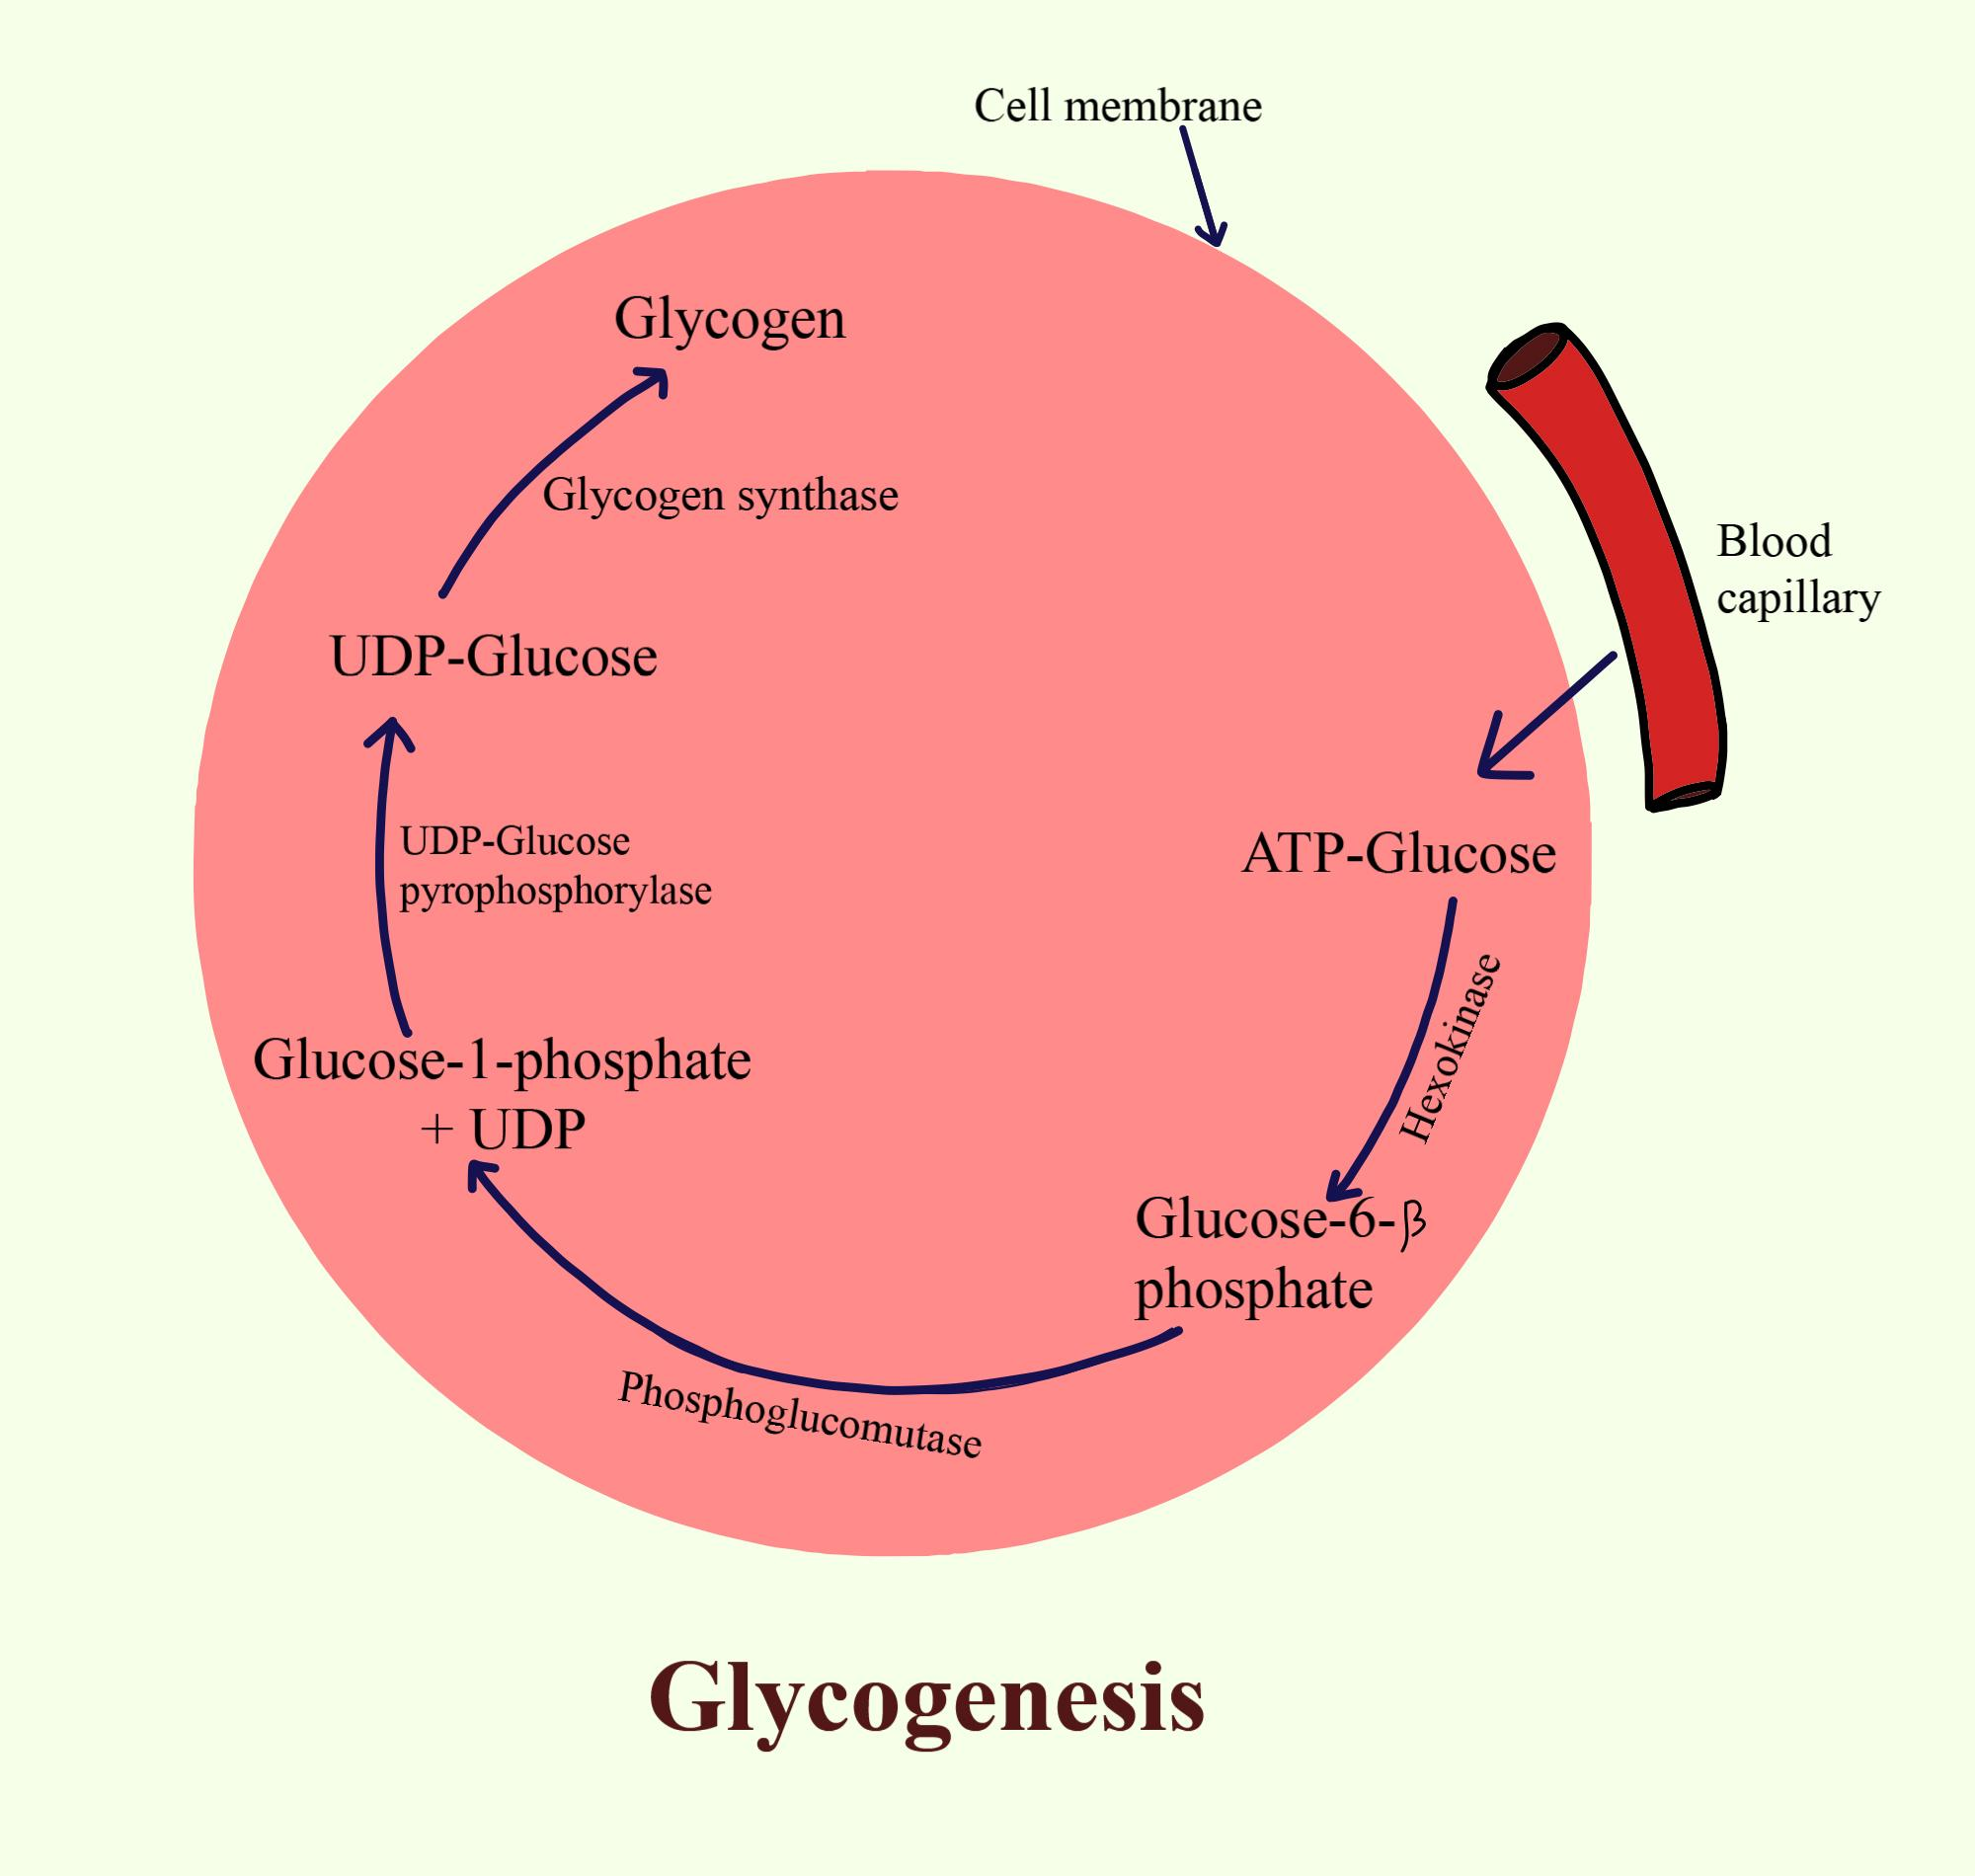 glycogenesis-refer-to-a-conversion-of-glycogen-to-glucose-b-breakdown-of-glucose-to-form